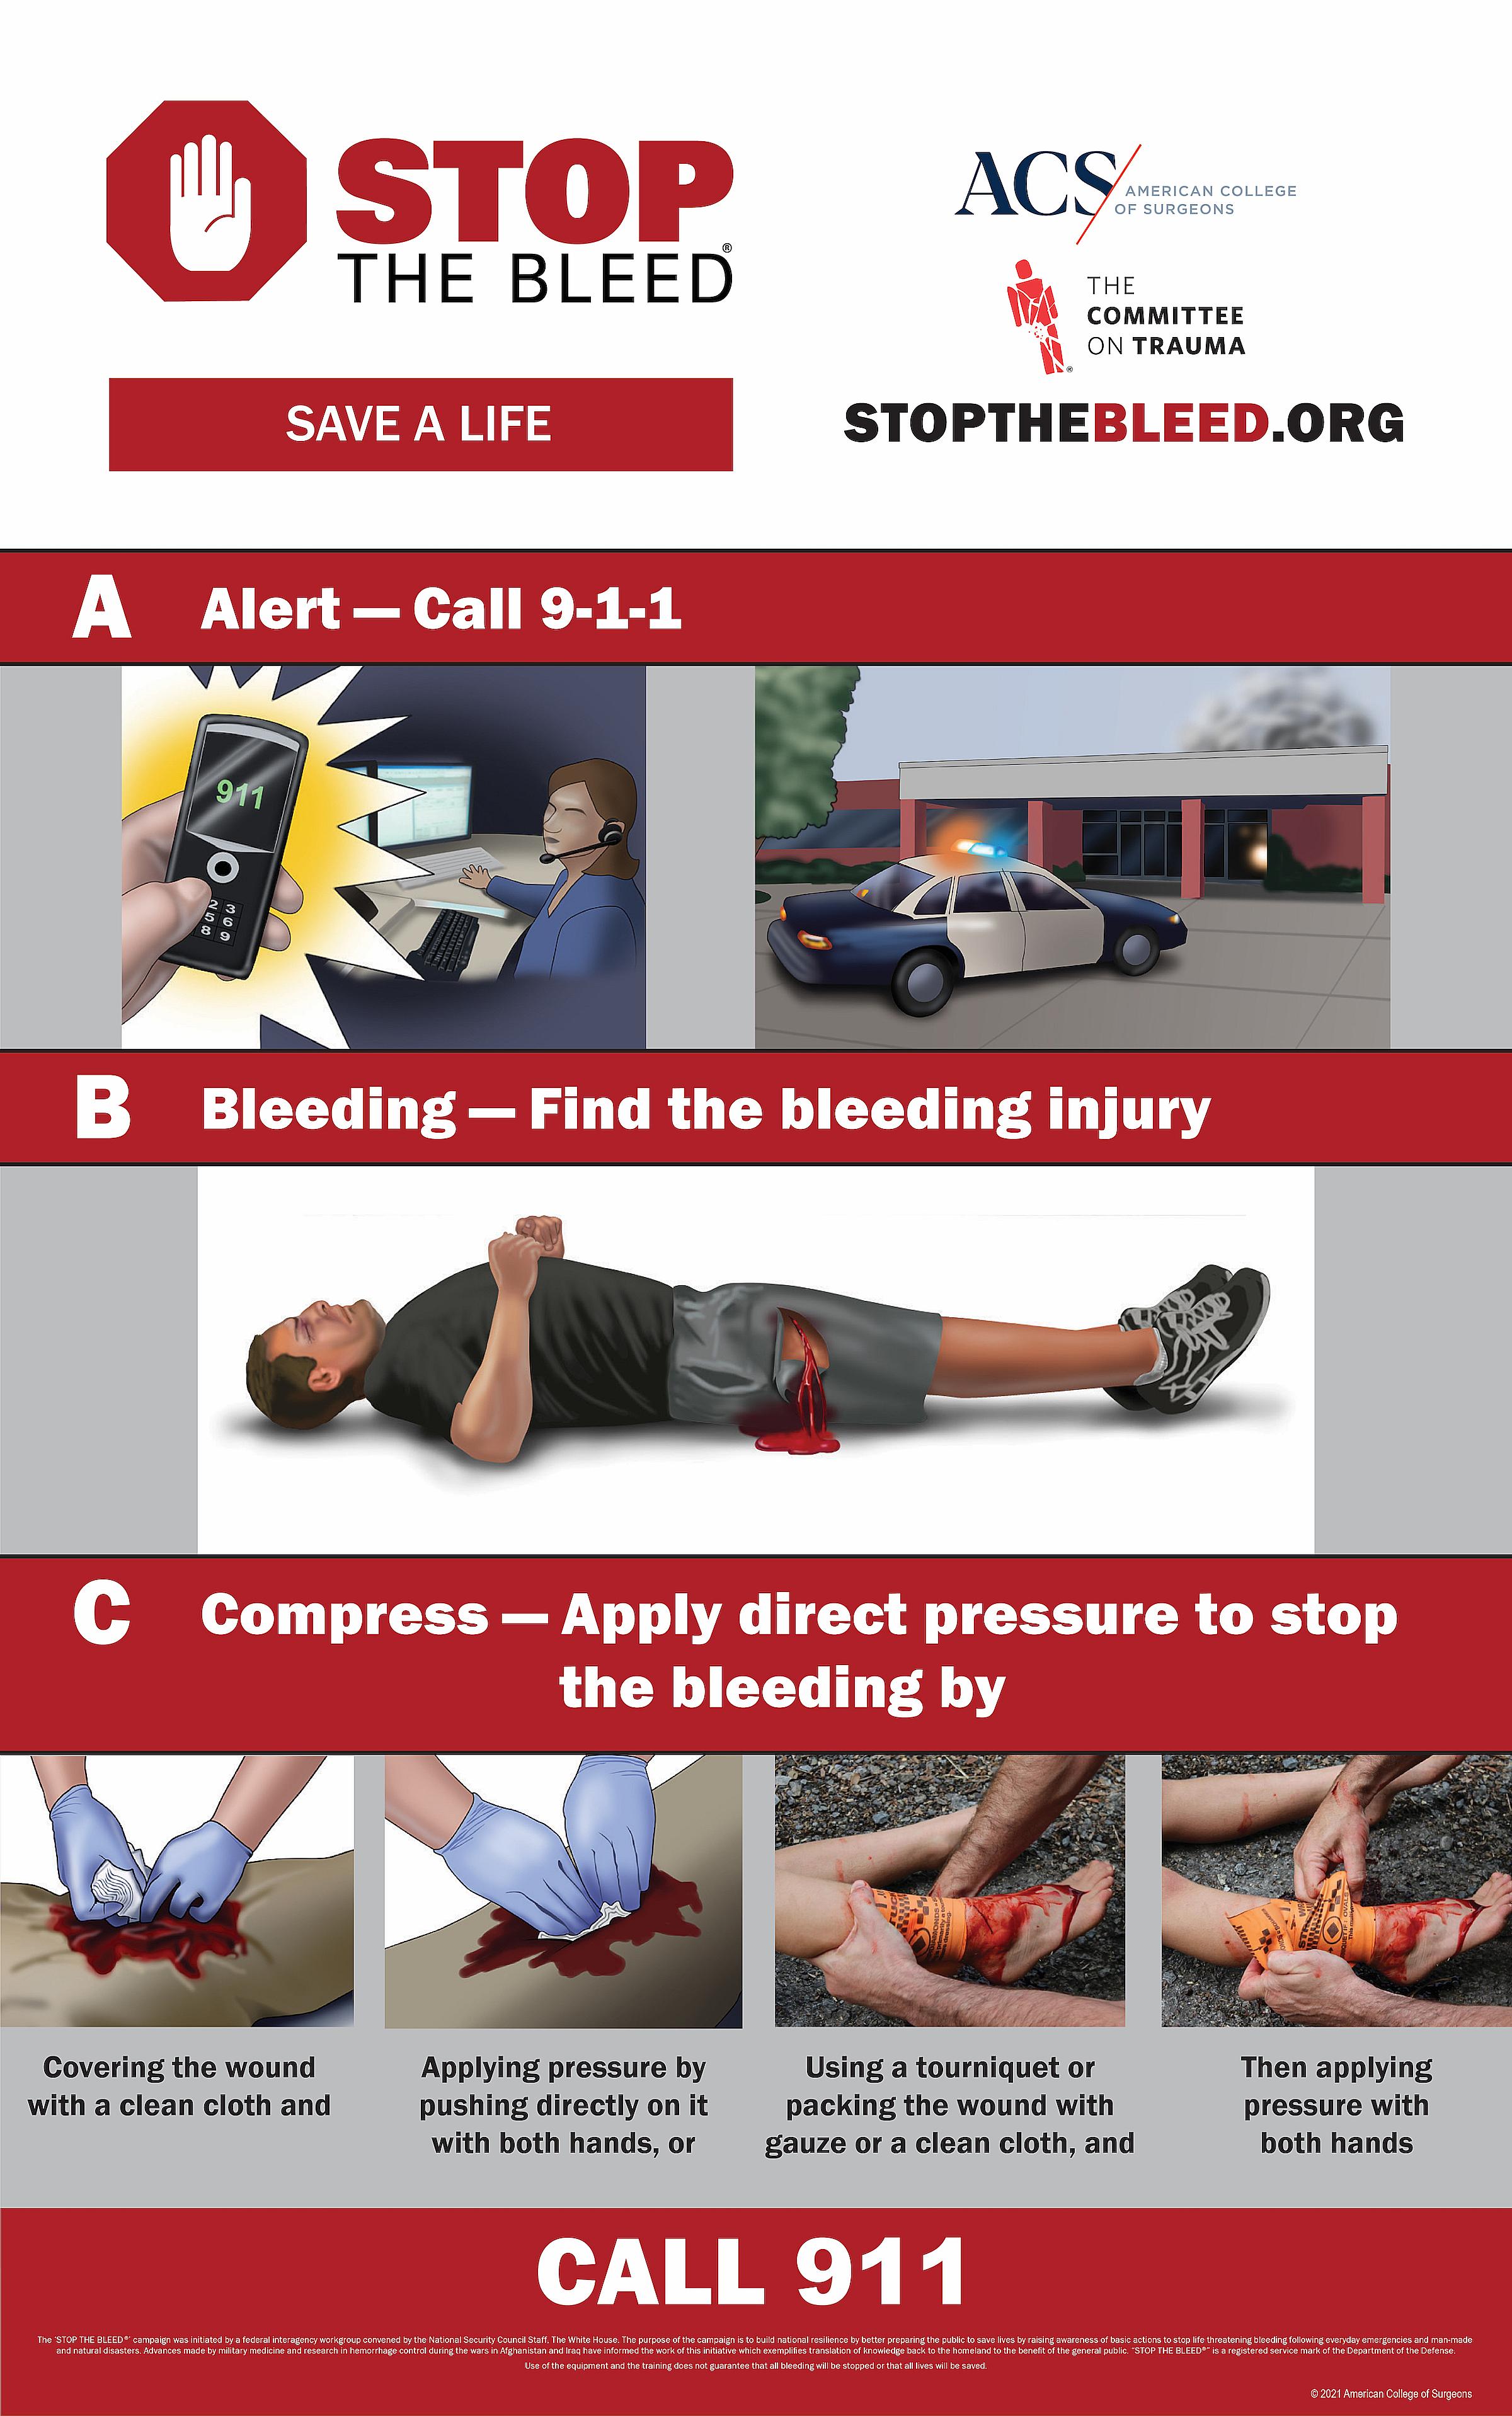 How to practice the ABCs of Stop the Bleed